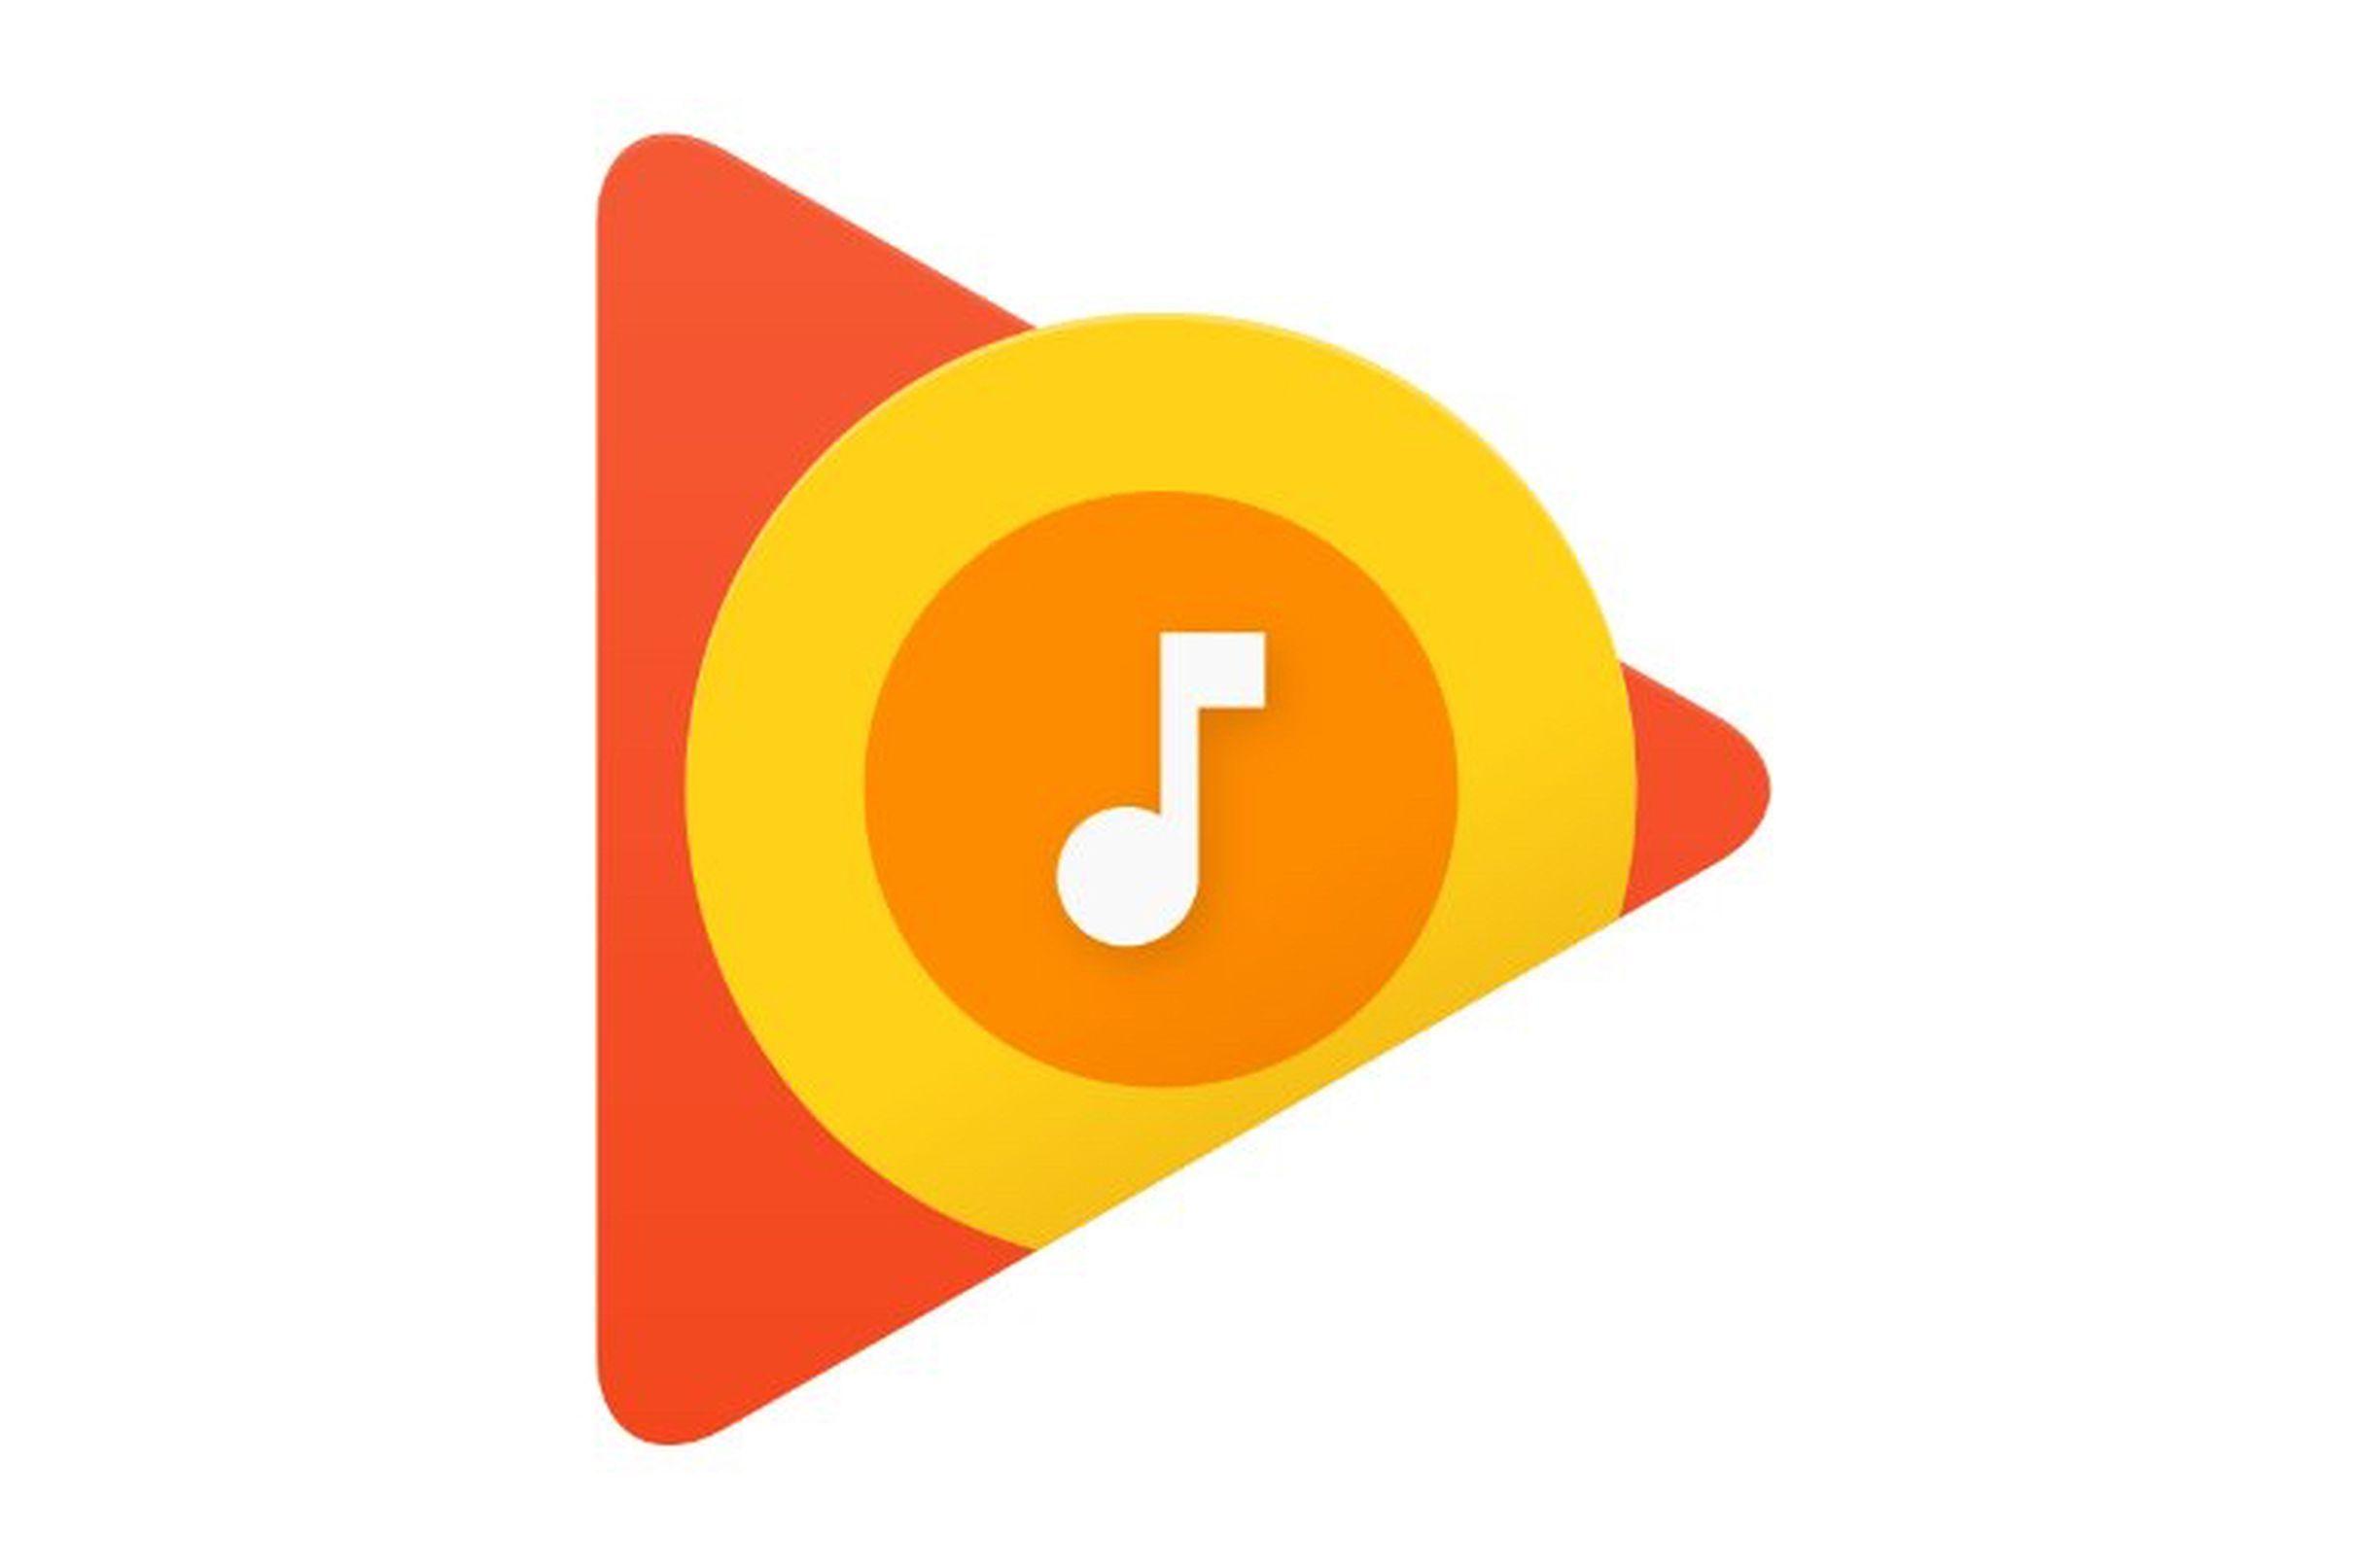 Old Android Logo - Google Play Music replaced its old headphones logo with breakfast ...